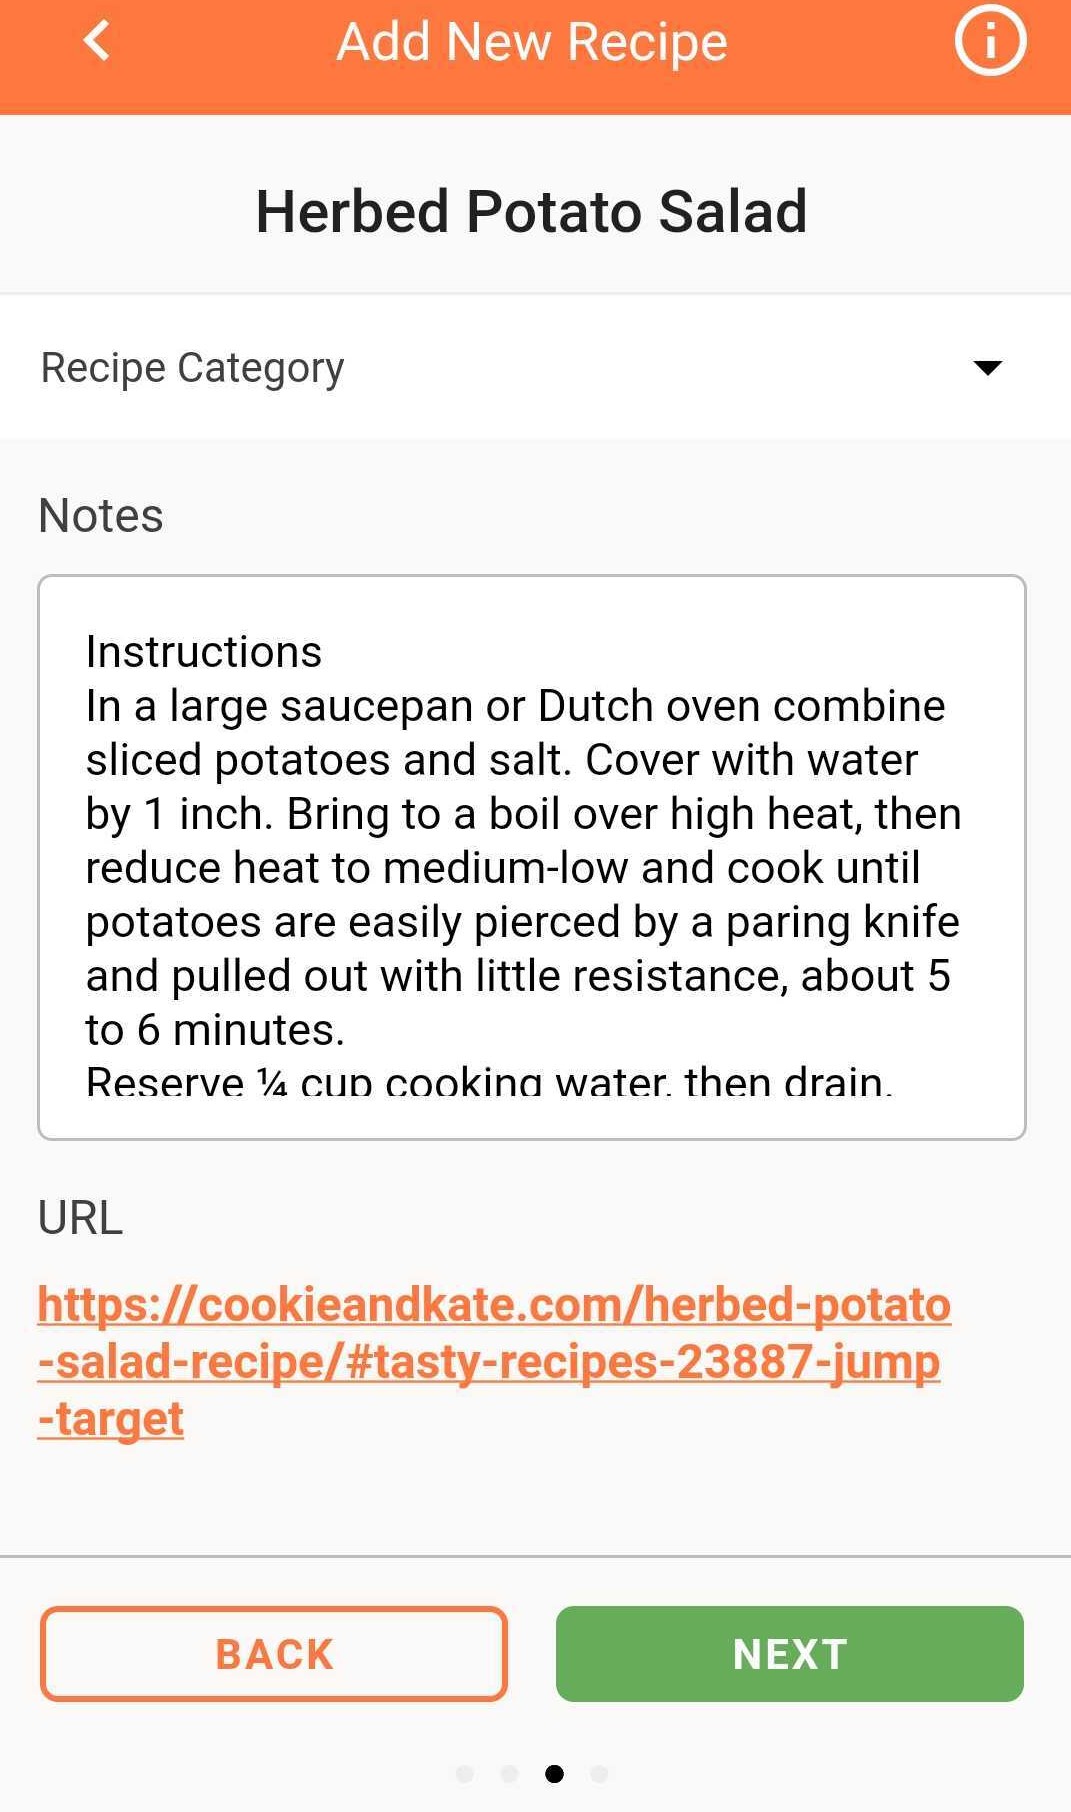 Ingredient_instructions_and_url.jpg